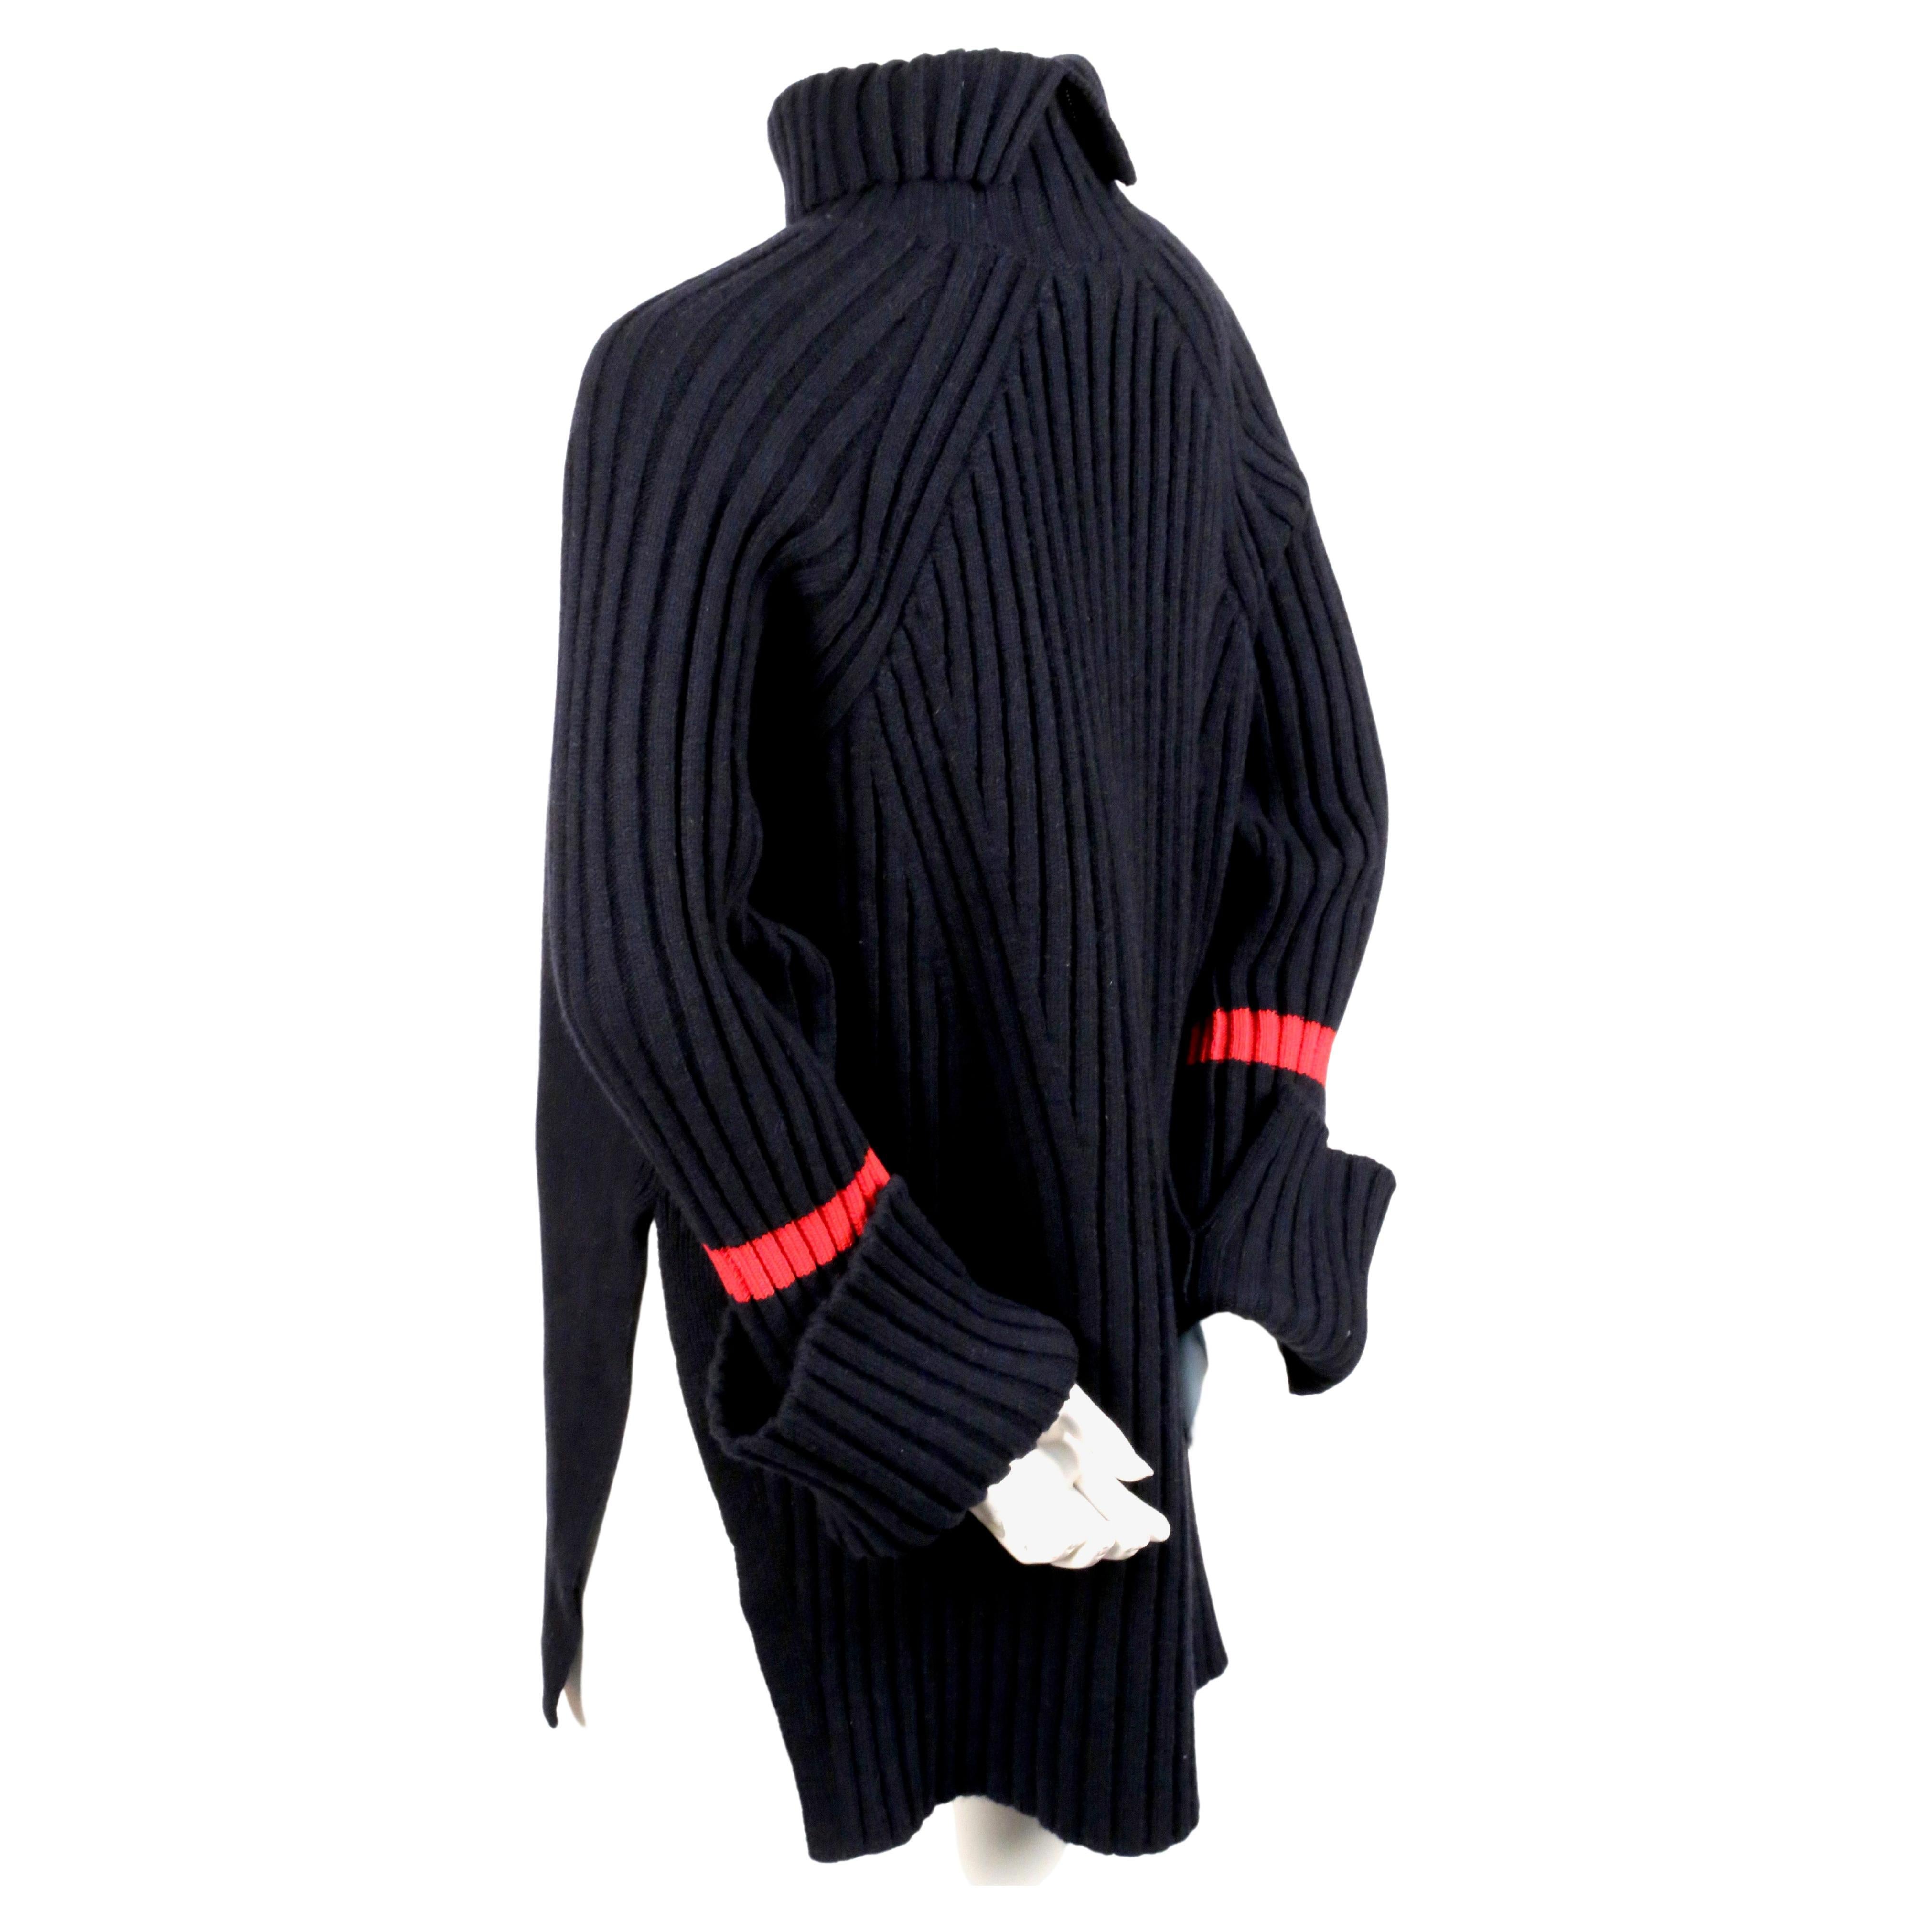 Black CELINE by PHOEBE PHILO oversized navy sweater with red stripe